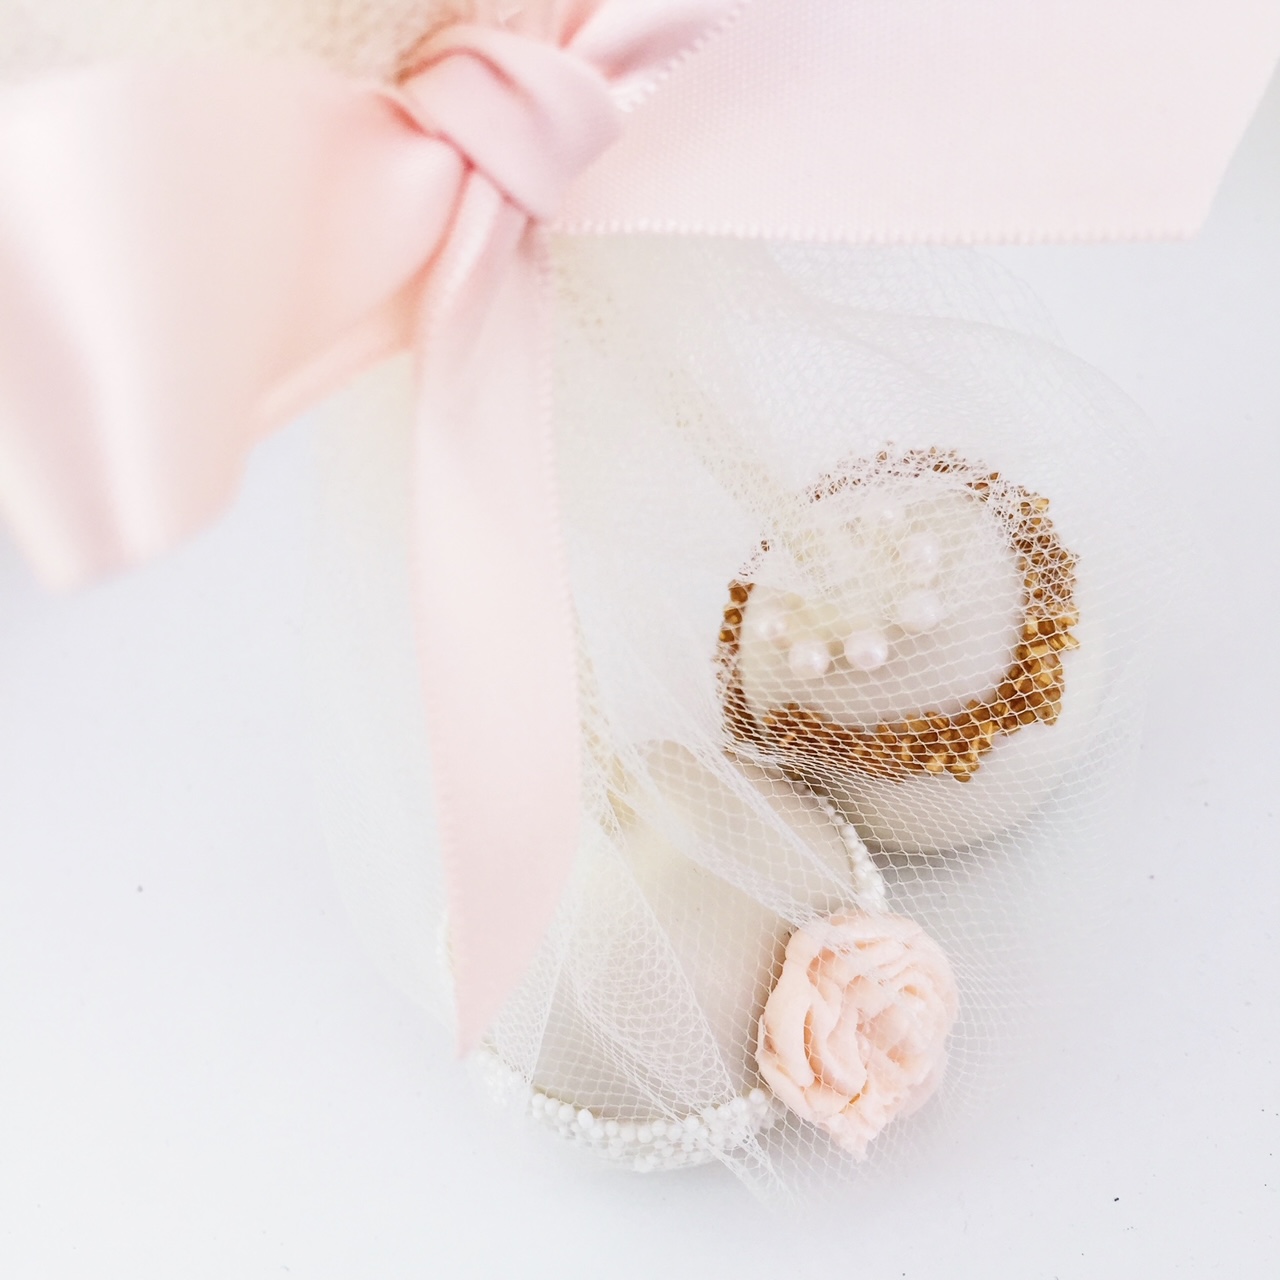 Sample Image of Edible Favour 005